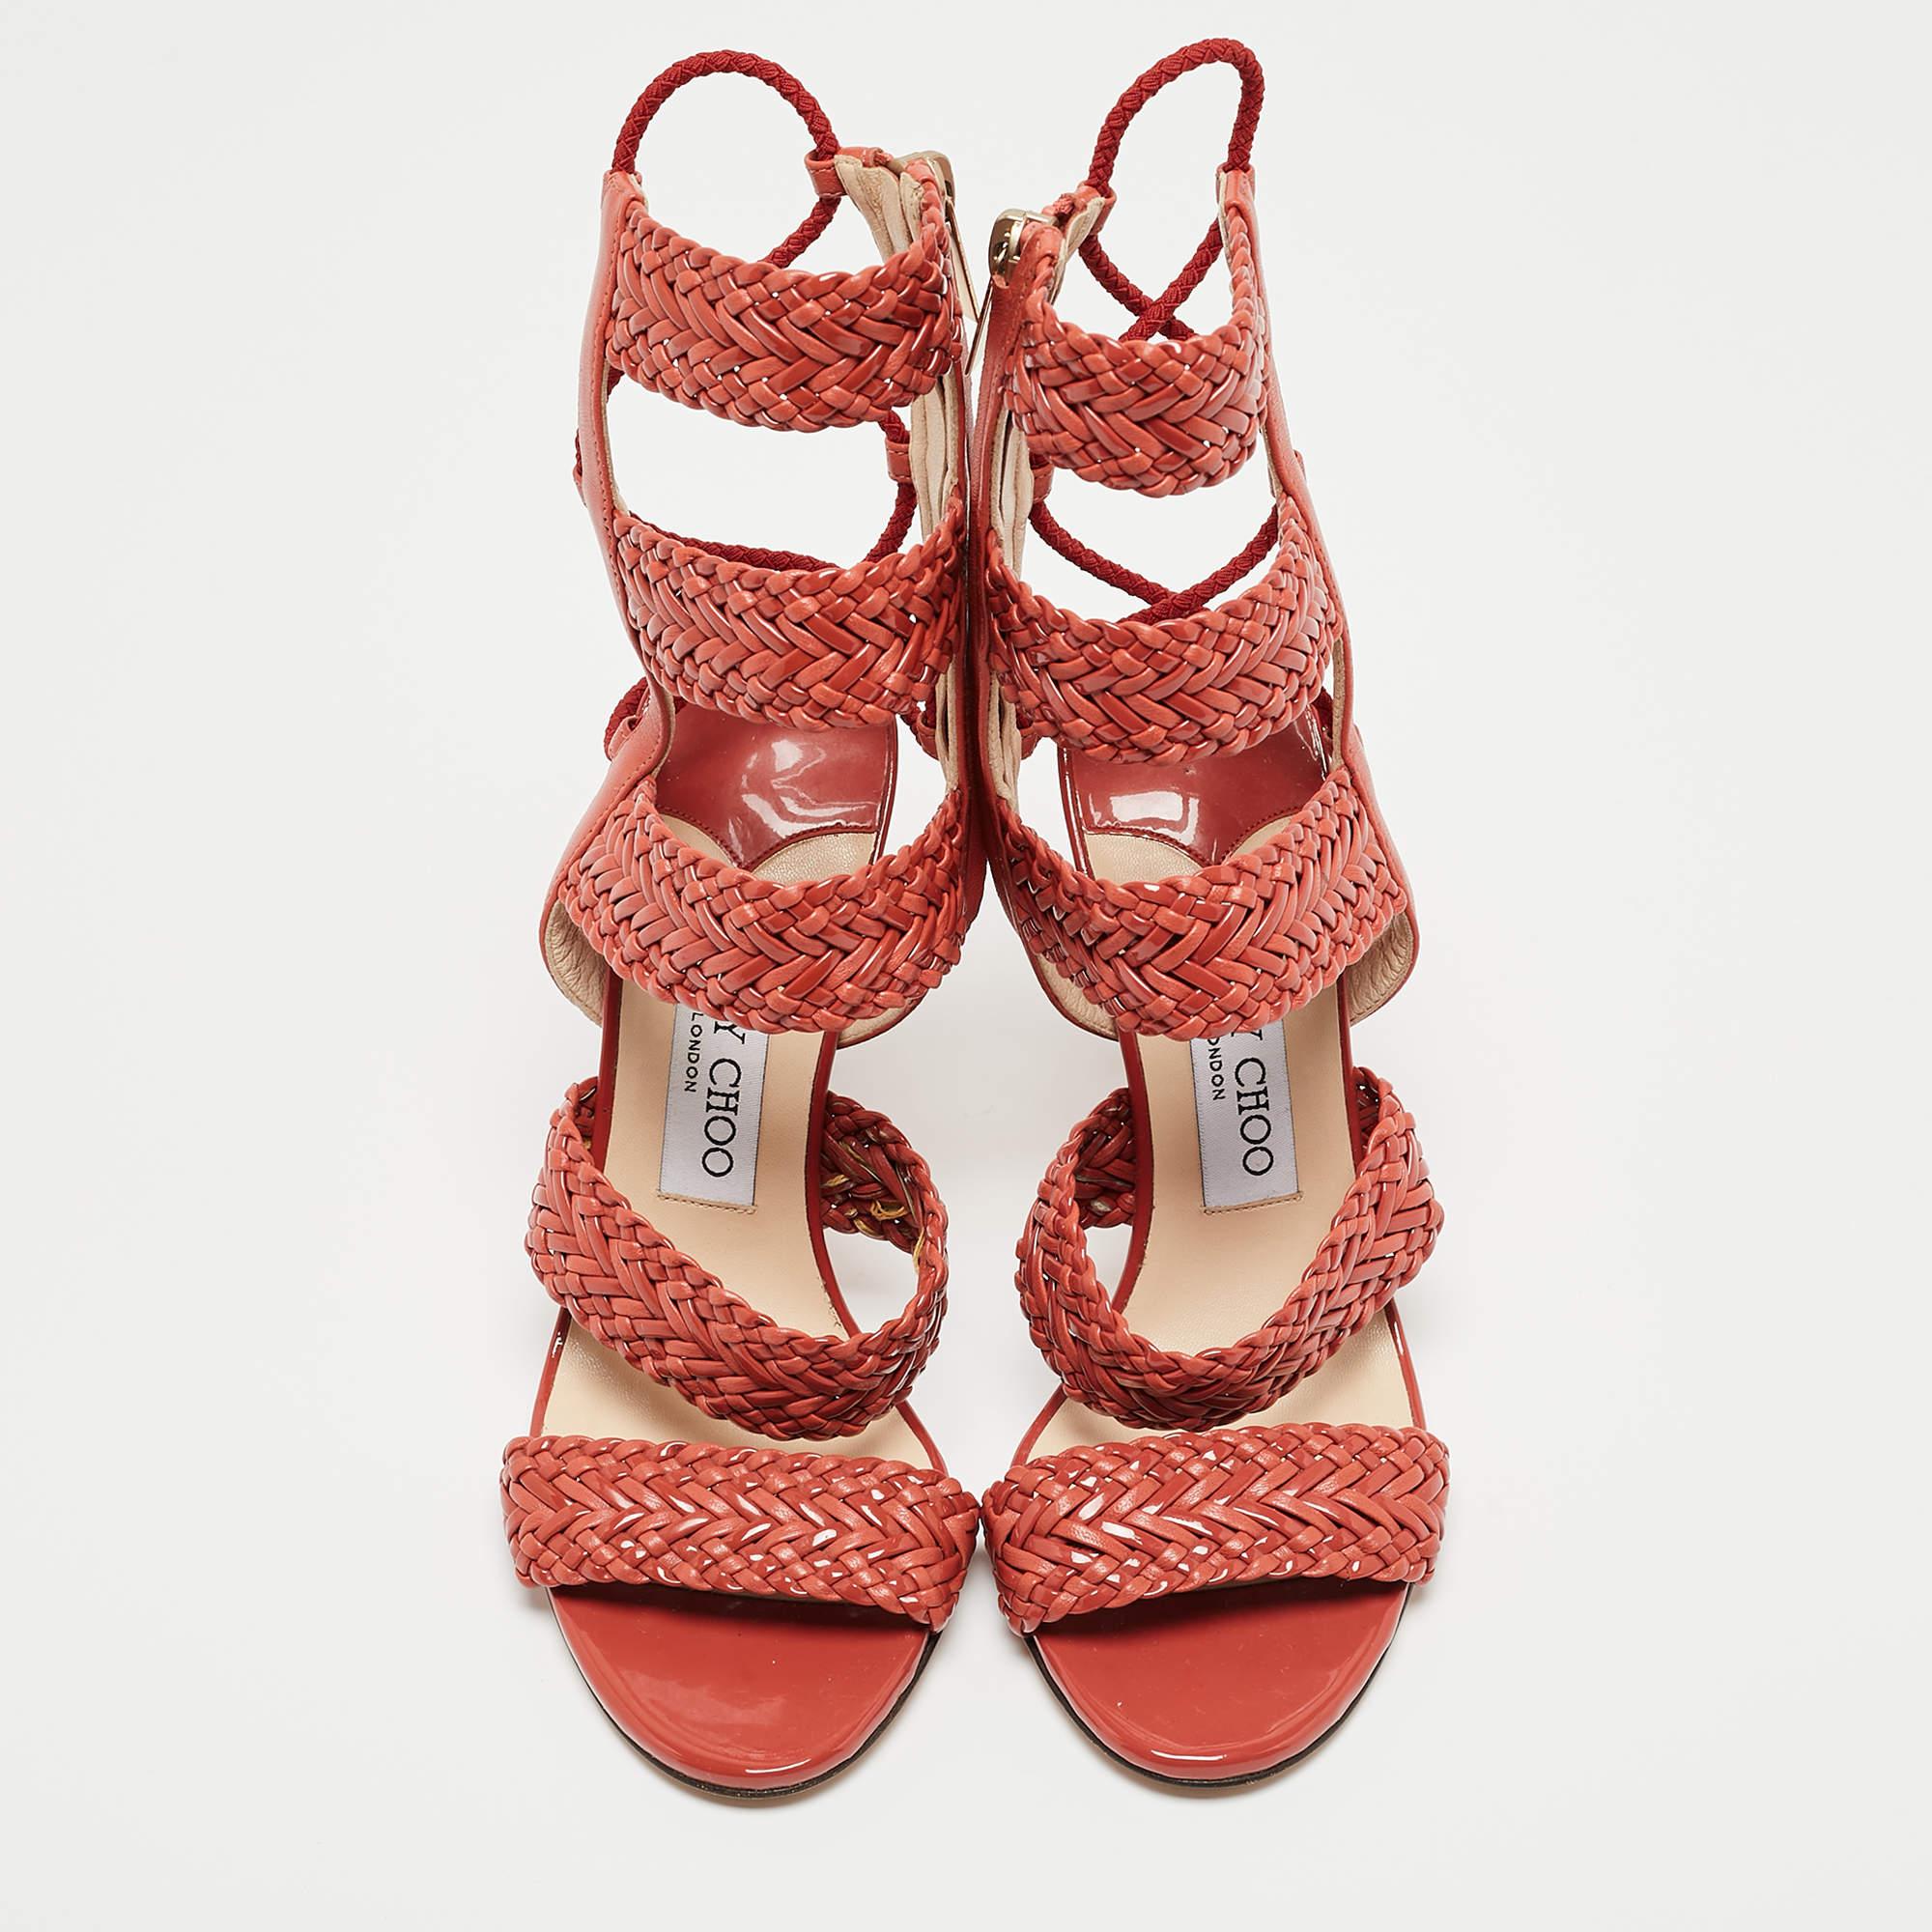 Jimmy Choo Orange Braided Leather and Suede Lima Gladiator Sandals Size 36 In Good Condition For Sale In Dubai, Al Qouz 2